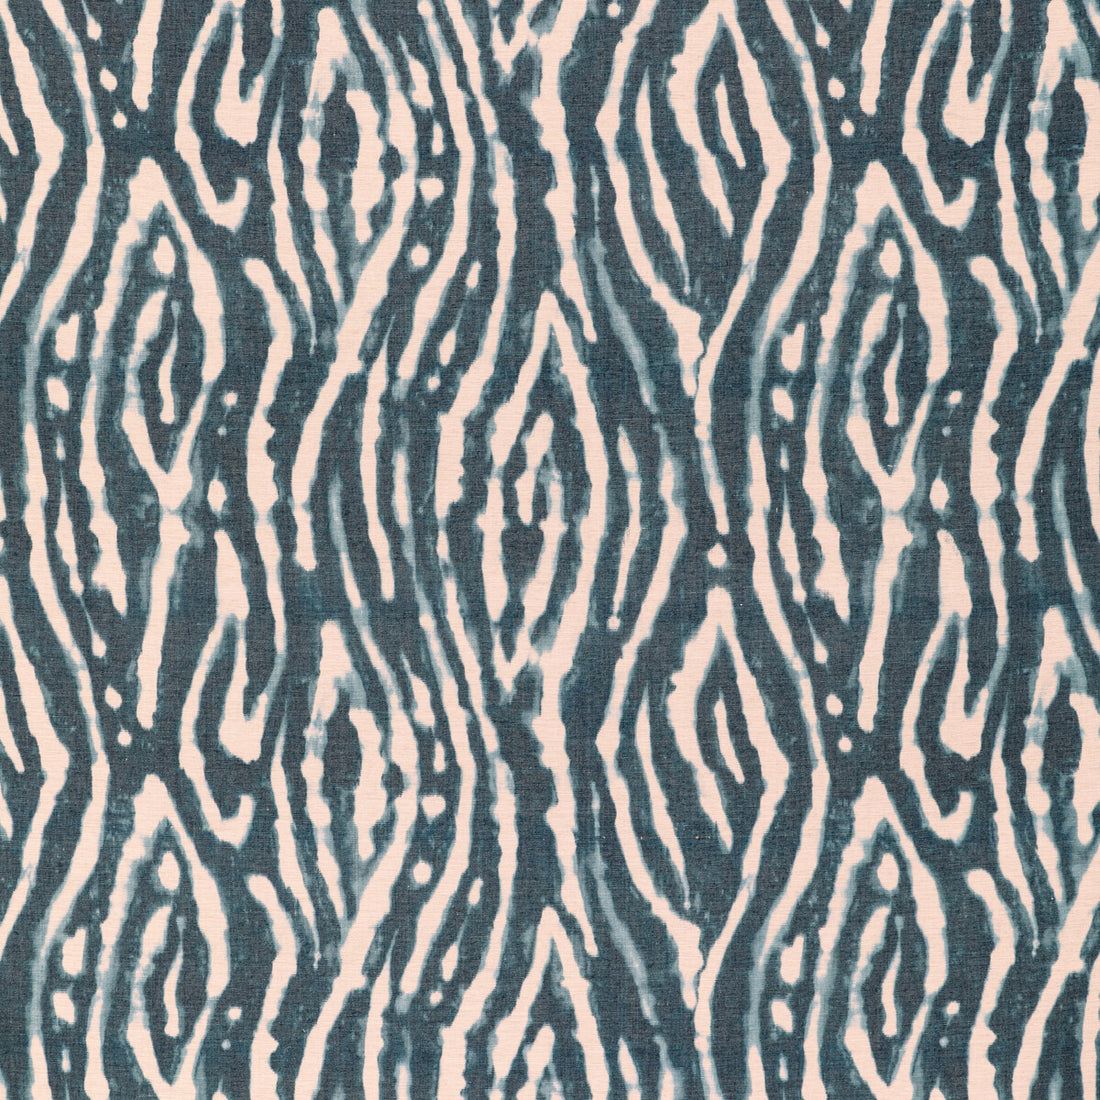 Salina Print fabric in indigo color - pattern 2020203.50.0 - by Lee Jofa in the Breckenridge collection